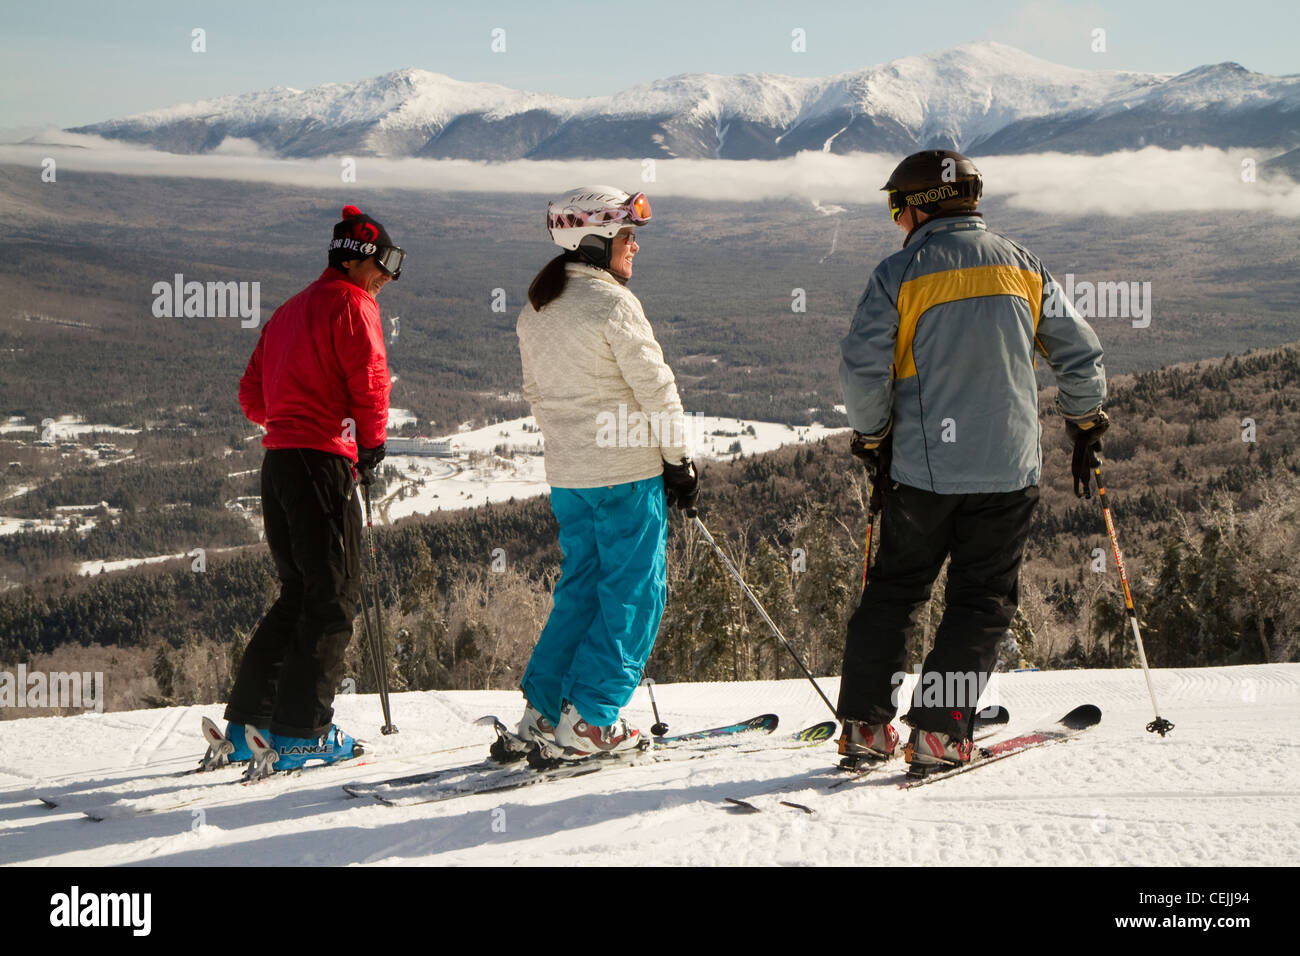 A trio of skiers stand at the top of Bretton Woods Ski area in NH, with the presidential Range in the background. Stock Photo